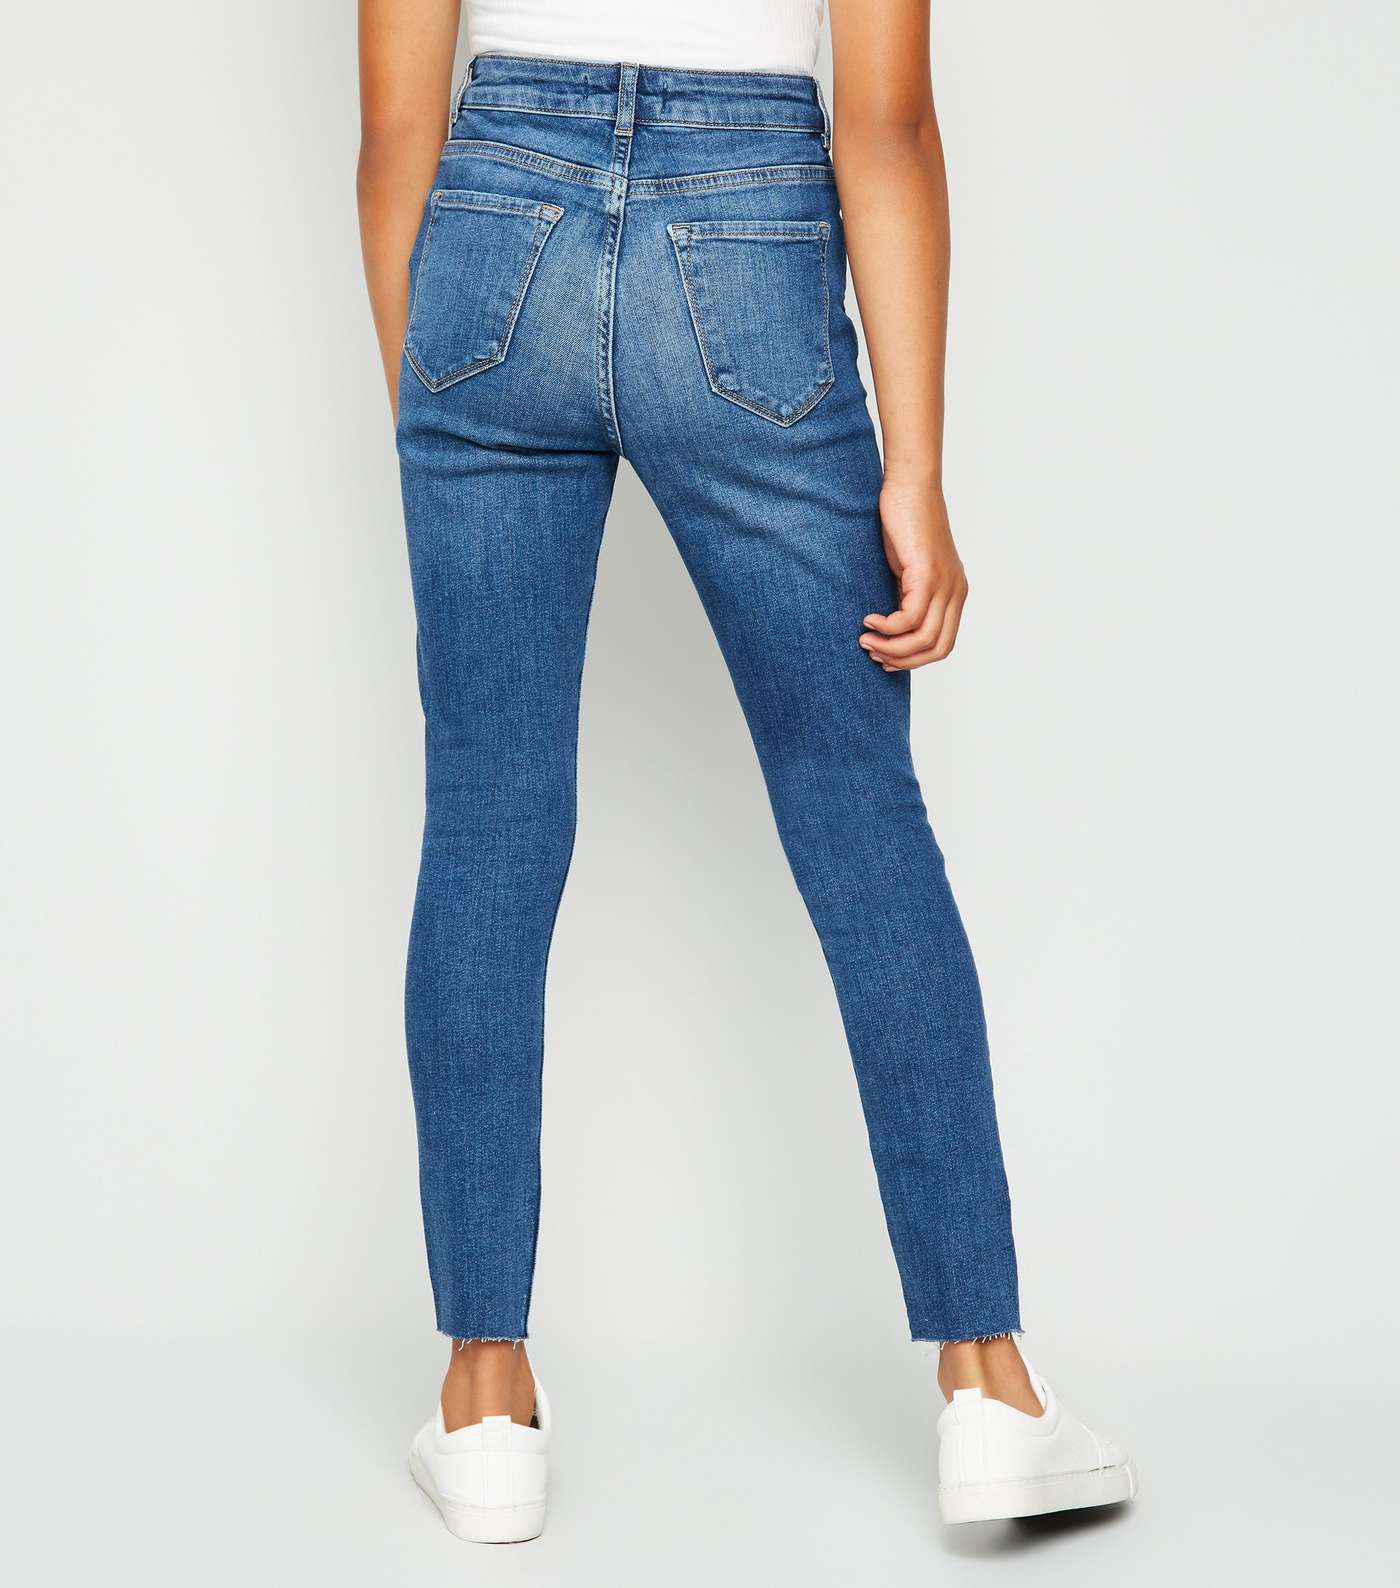 Girls Blue Ripped Mid Wash Skinny Jeans Image 3